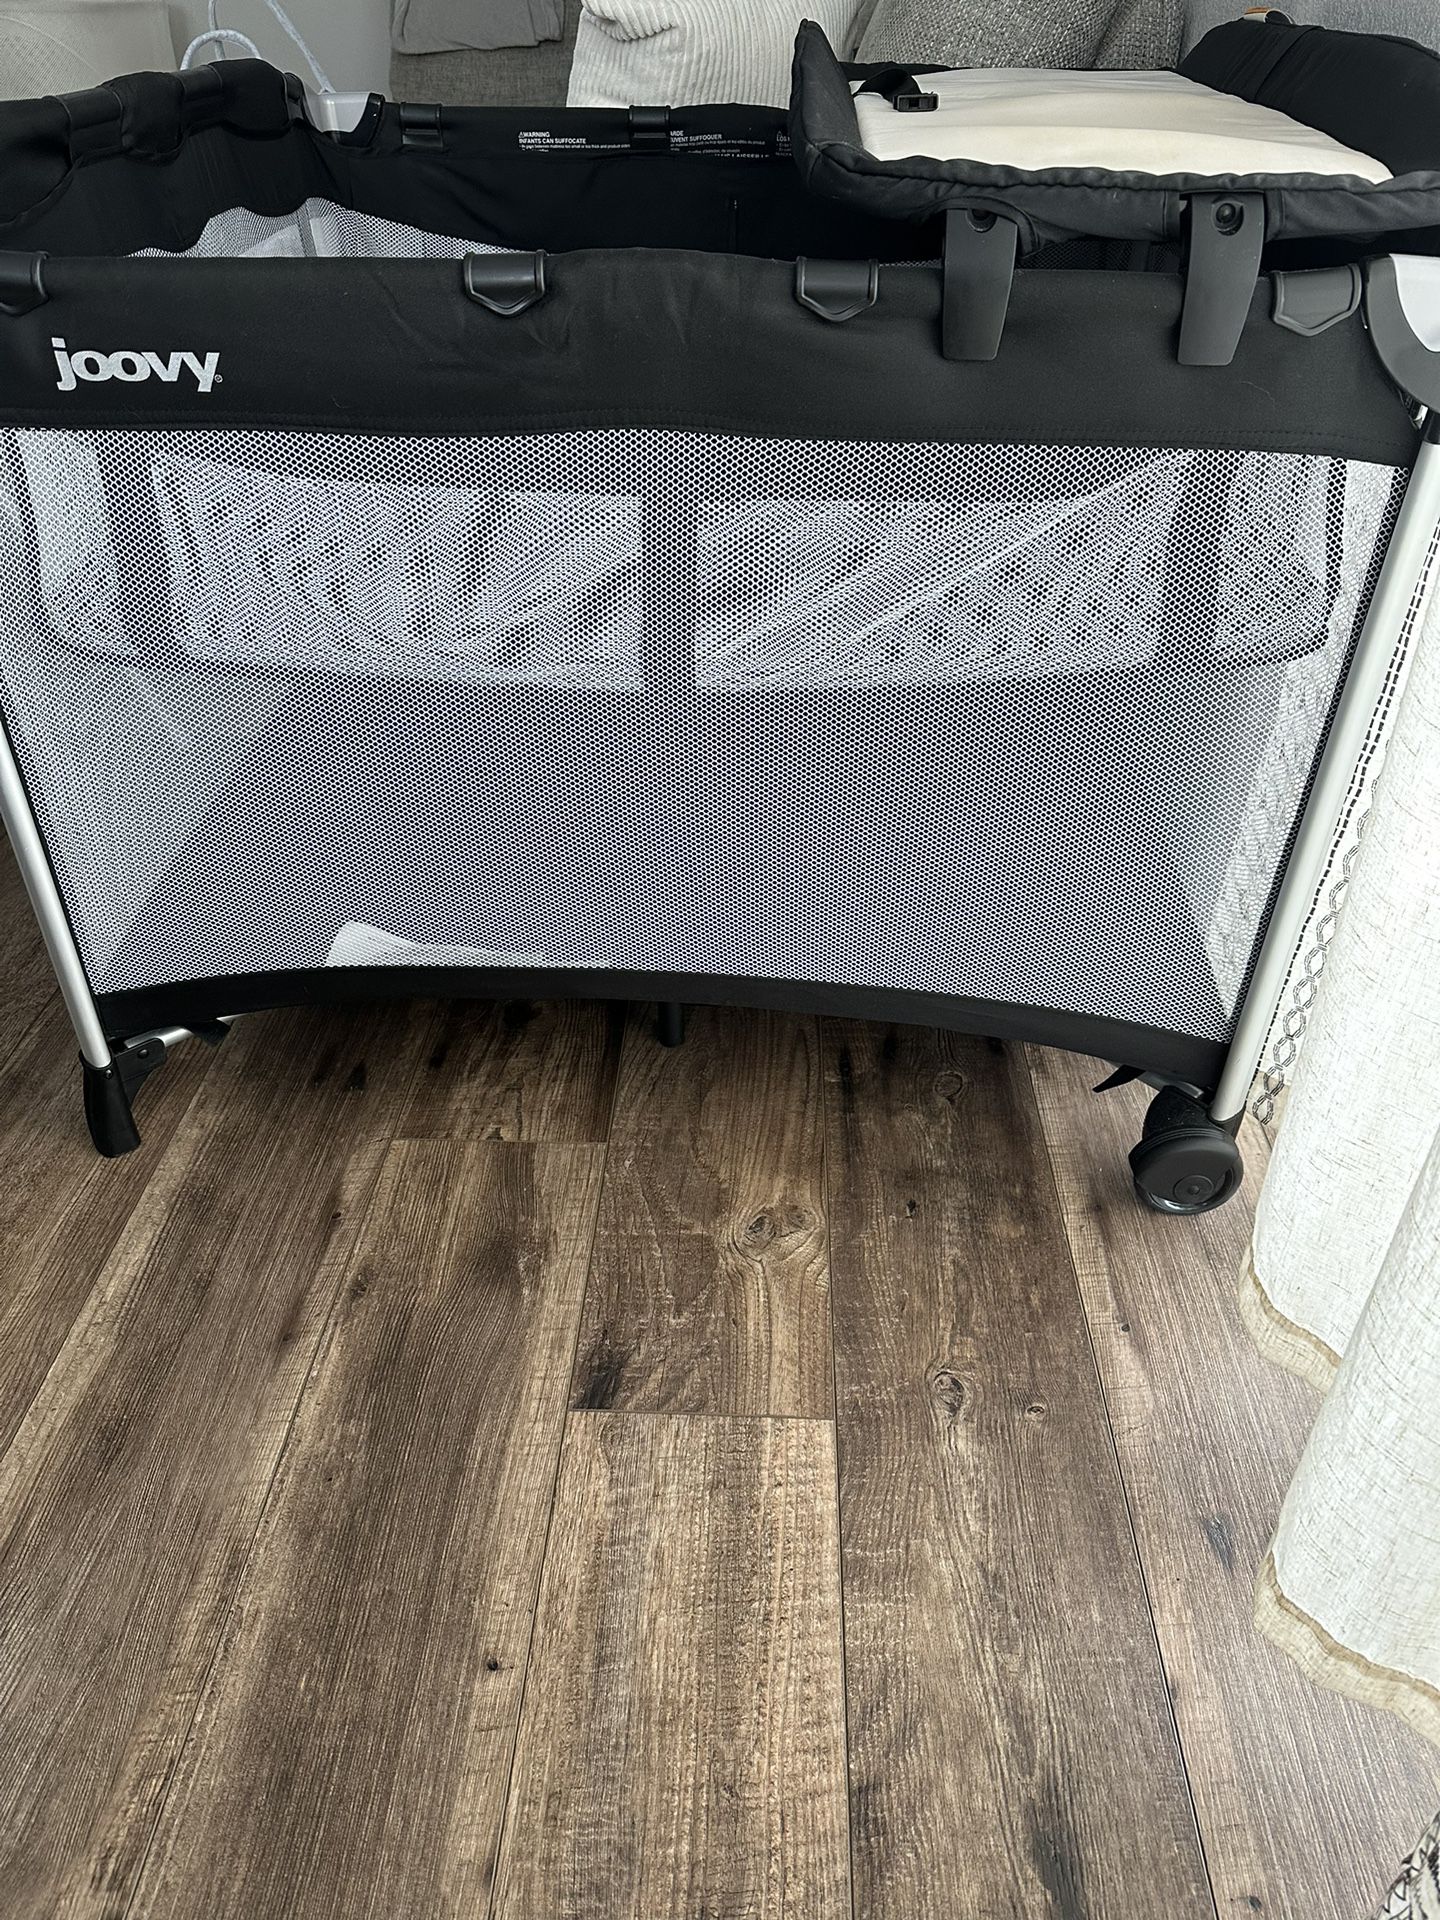 Joovy Play Yard With Twin Attachment